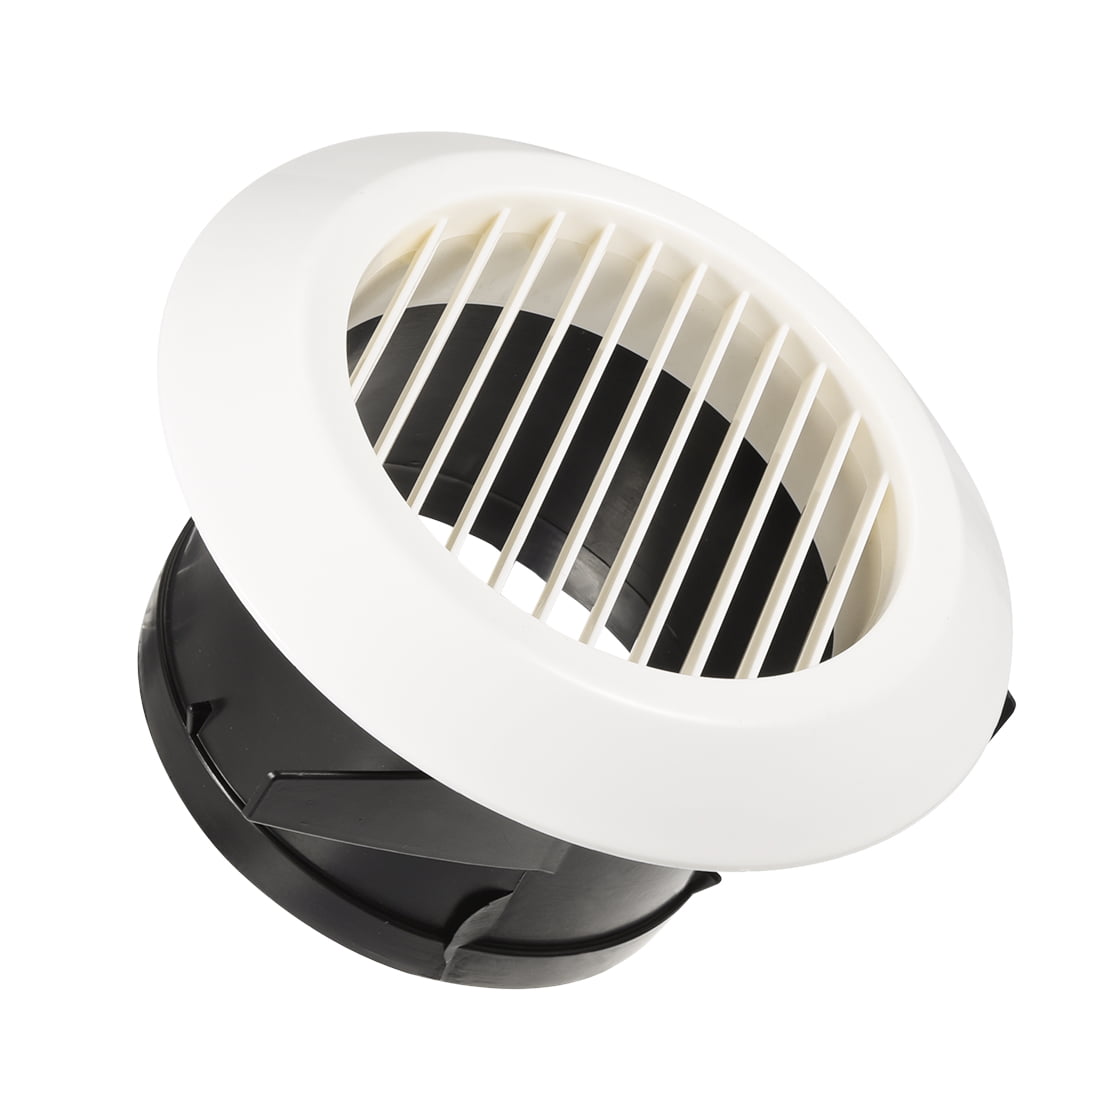 Tfly Air Vent Louver 5 inch Round ABS Soffit Vents Exhaust Air Grill Ceiling Vent Cover with Built-in Mesh Screen for Bathroom Kitchen Office Ventilation ø125mm